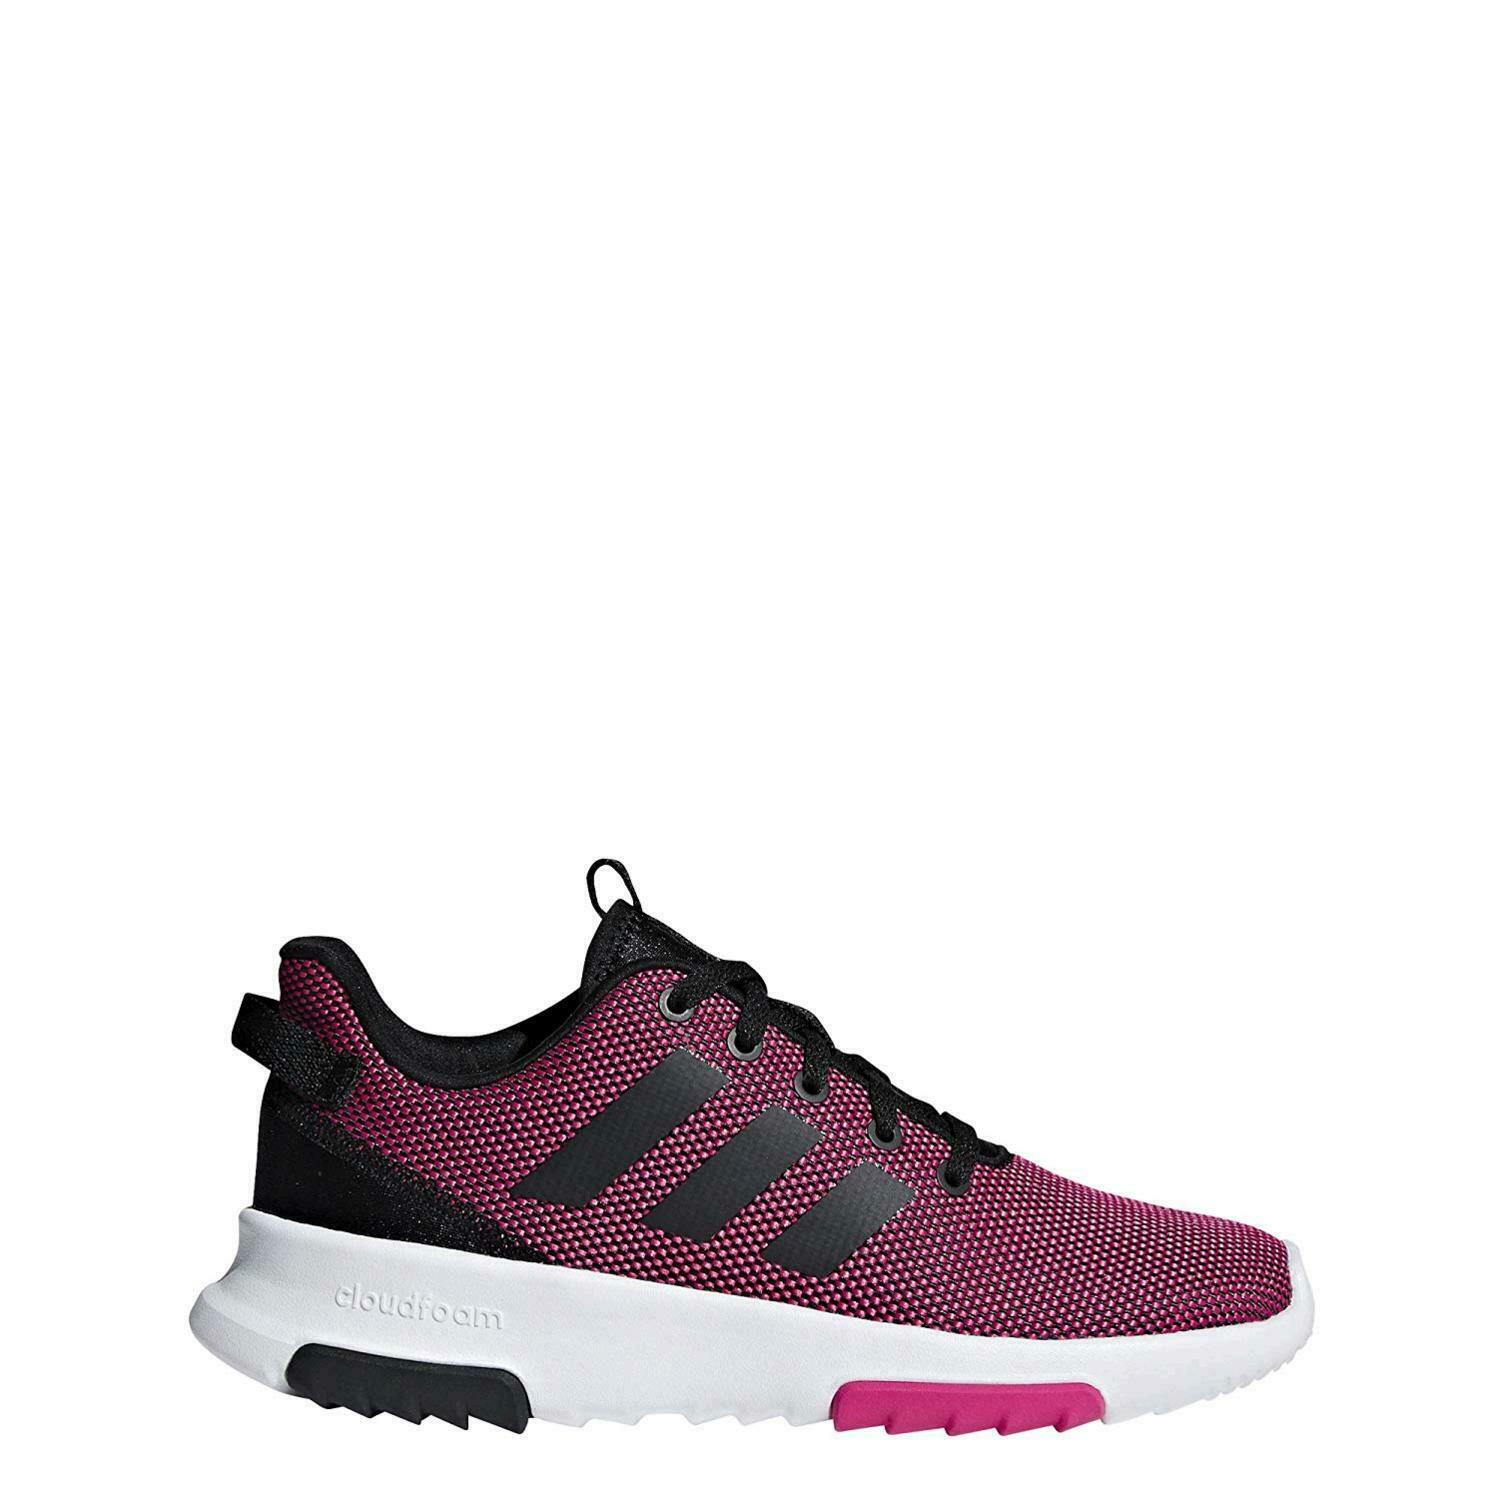 Kids Adidas Girls Racer tr k Low Top Lace Up Walking Shoes, Pink, Size 5.0 iOYz